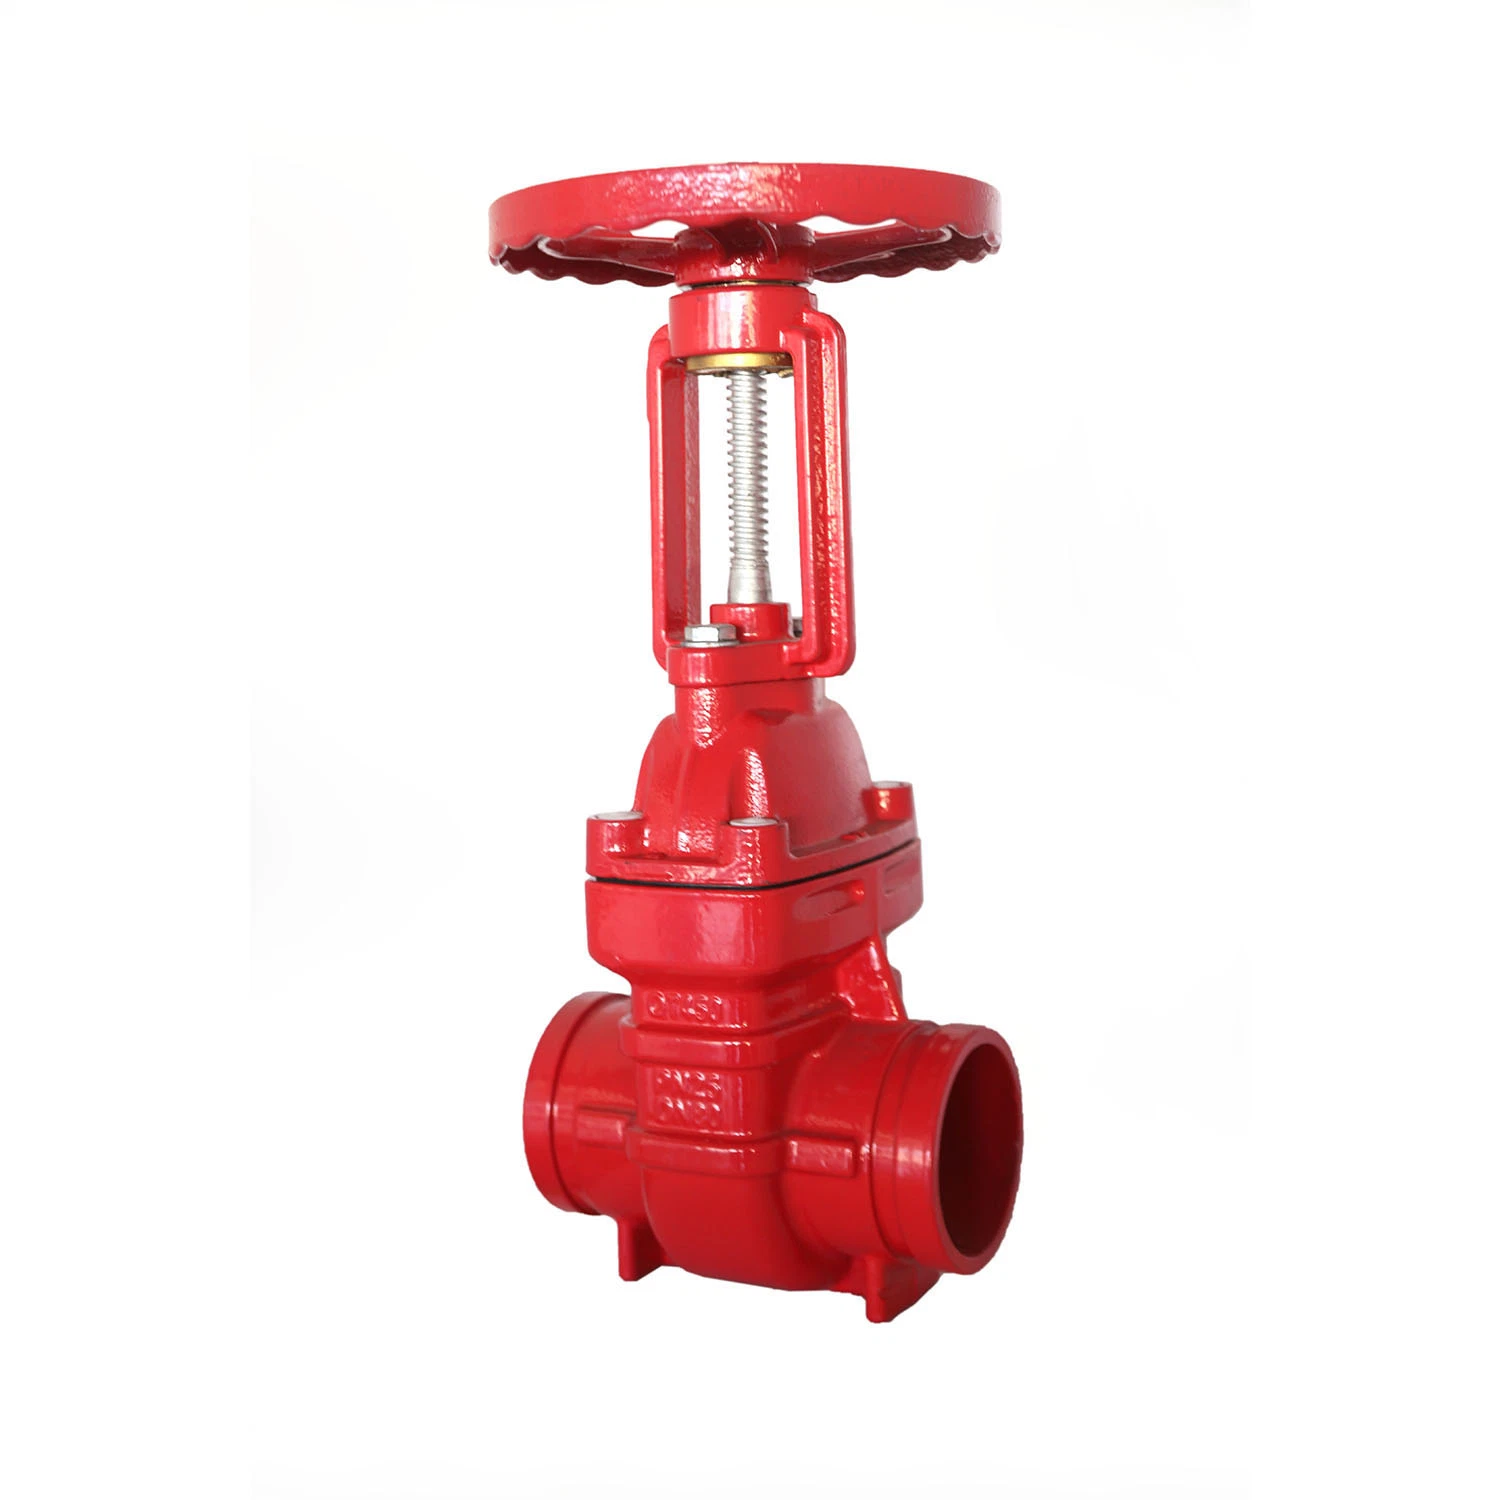 Soft Sealing Gate Valve Pn25 Grooved Type with Rubber Seat for Industrial Pipe